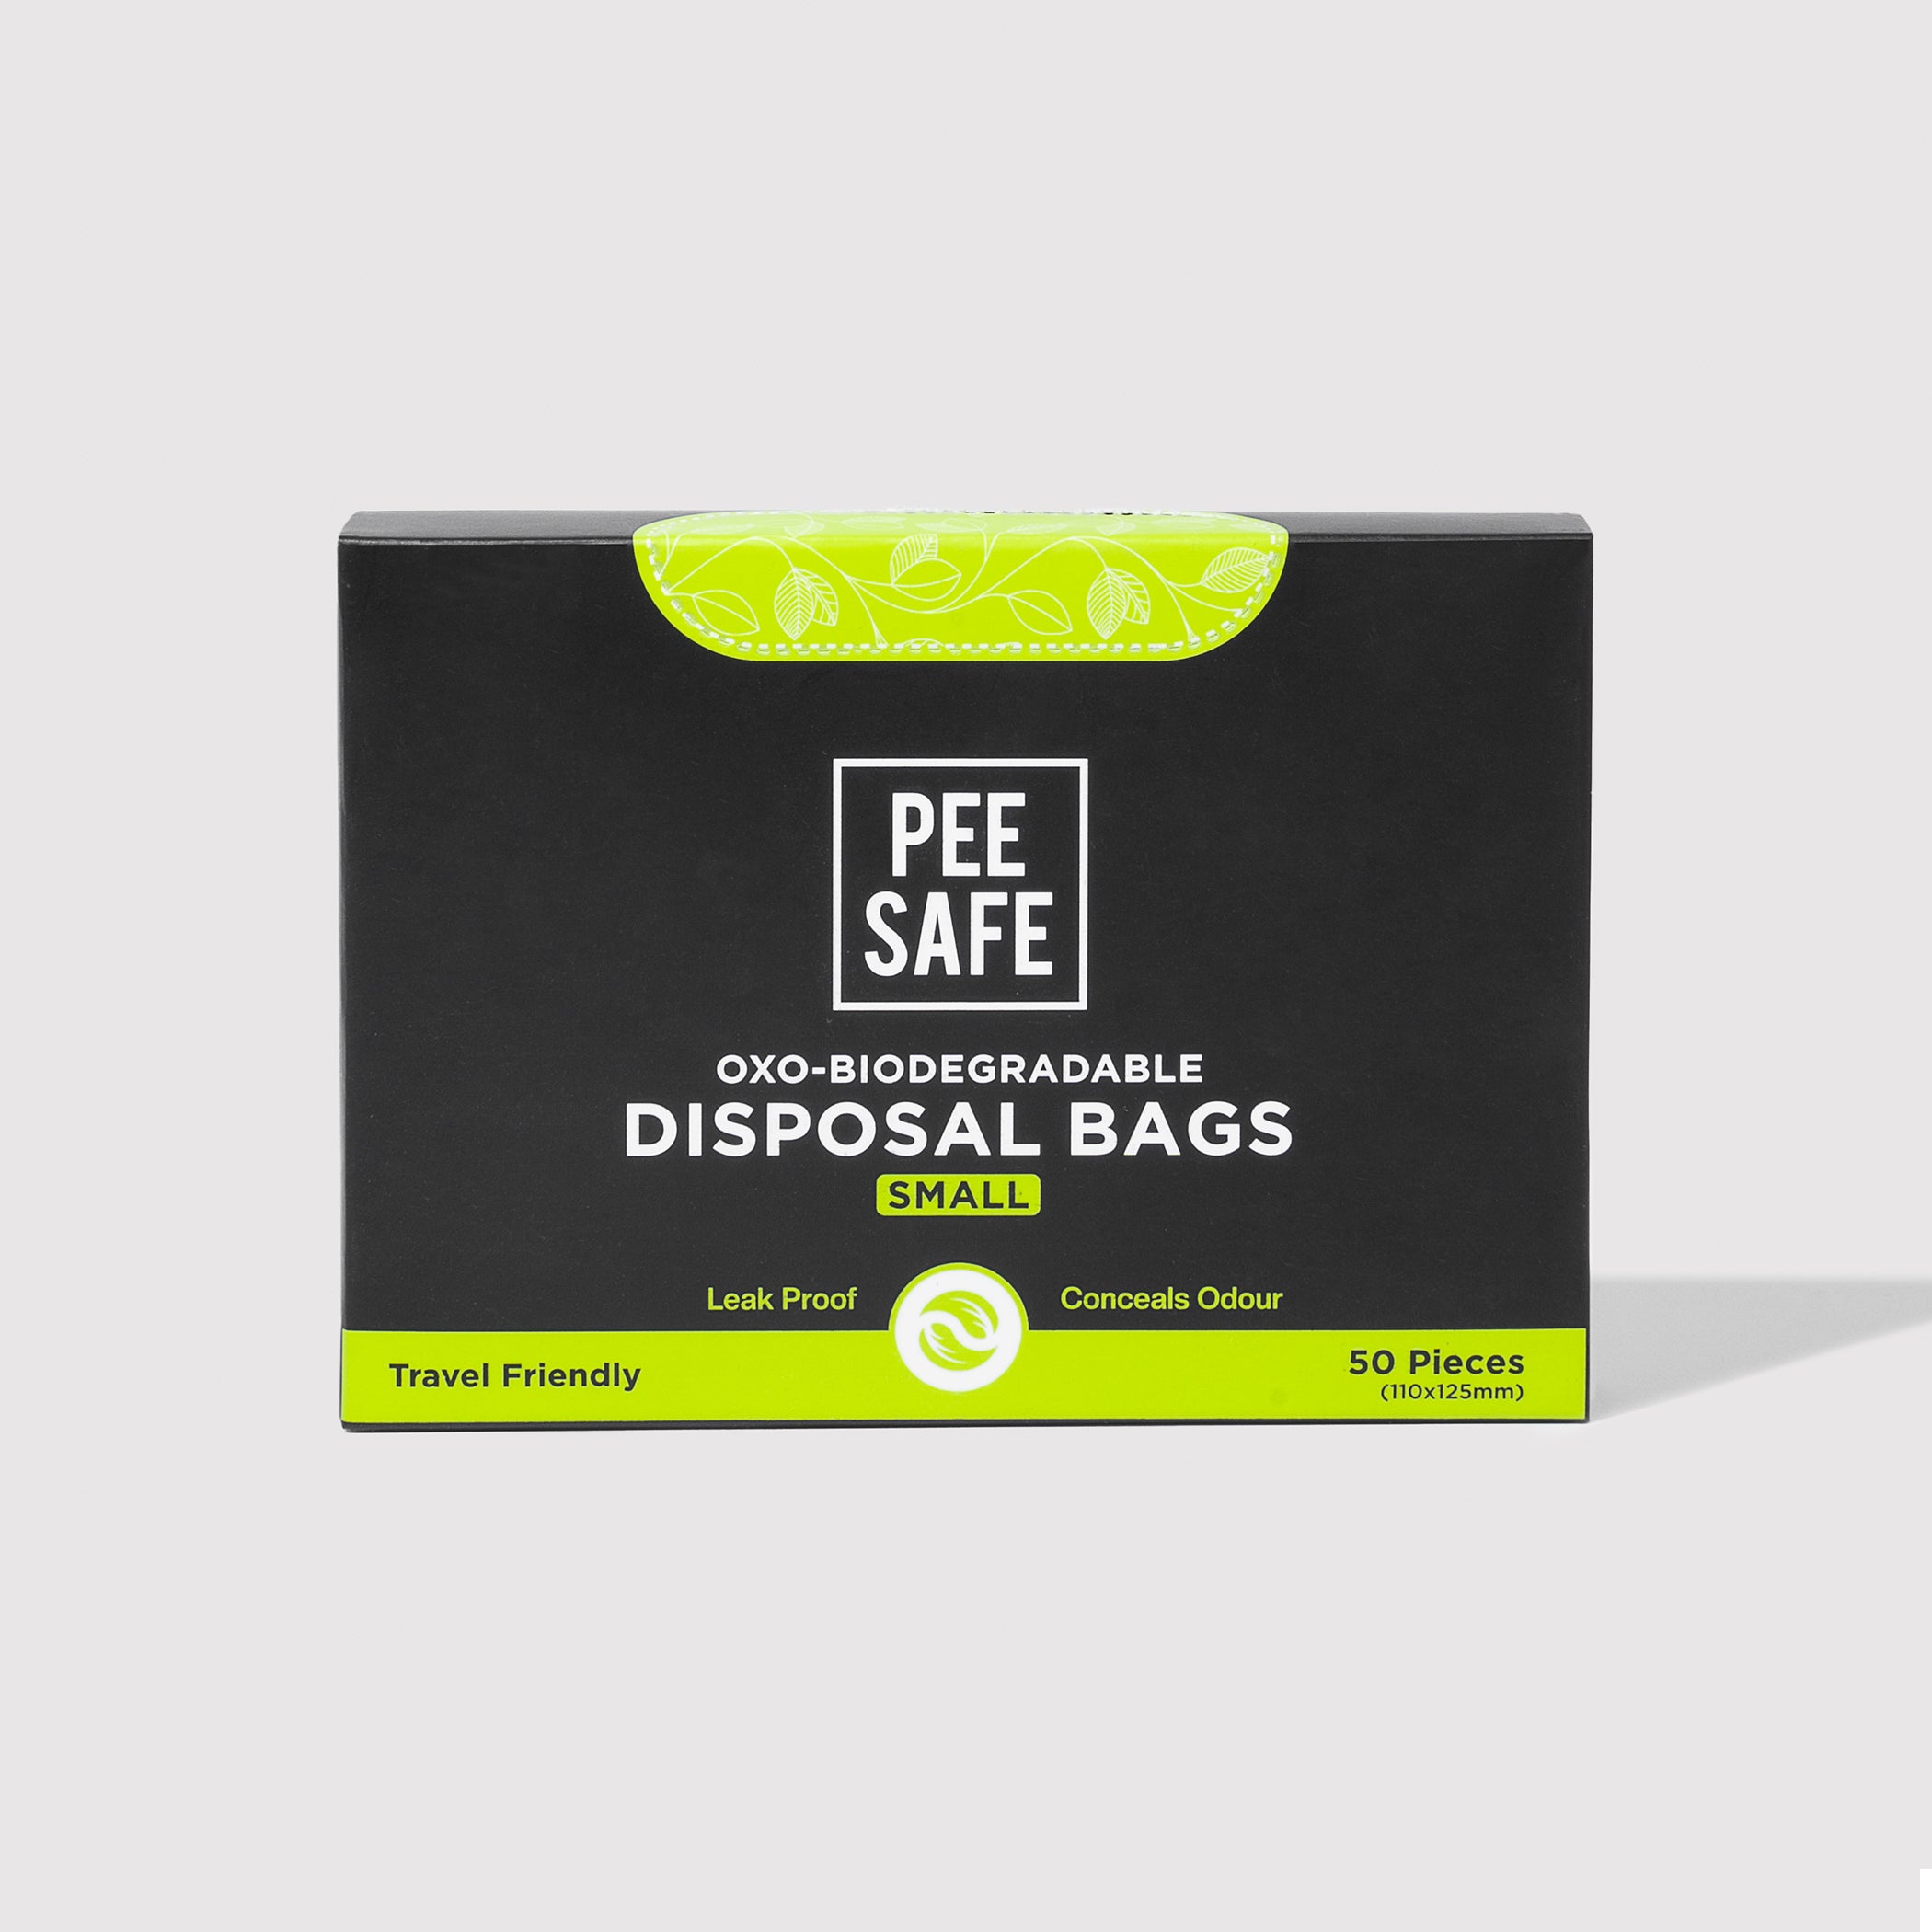 Pee Safe Oxo-Biodegradable Disposable Bags - 50 Bags (Small)